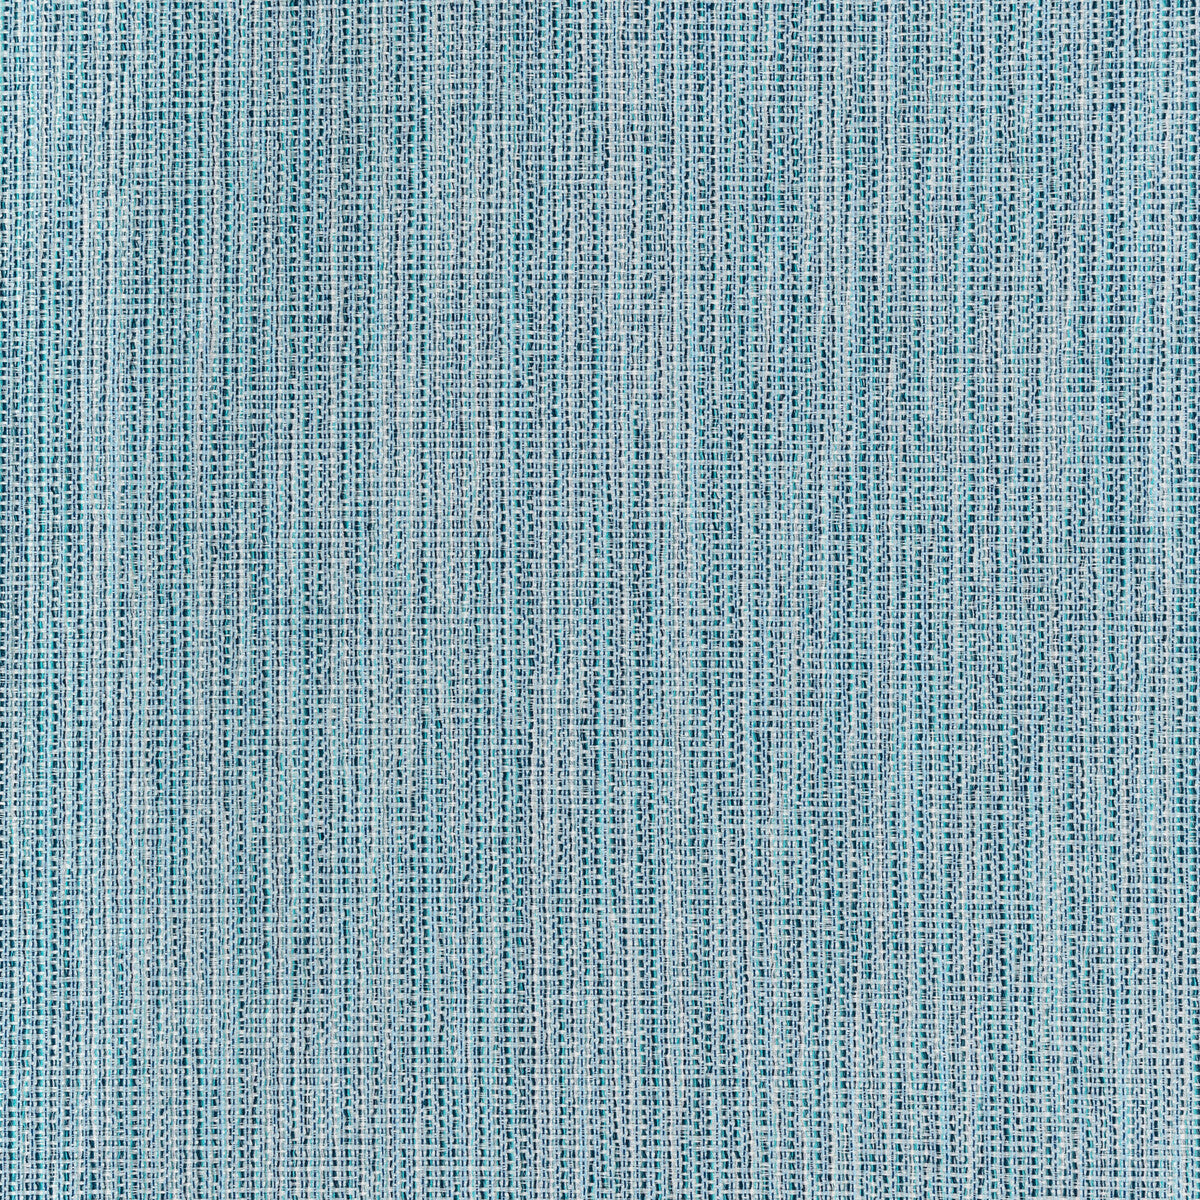 Kravet Smart fabric in 35965-35 color - pattern 35965.35.0 - by Kravet Smart in the Performance Crypton Home collection